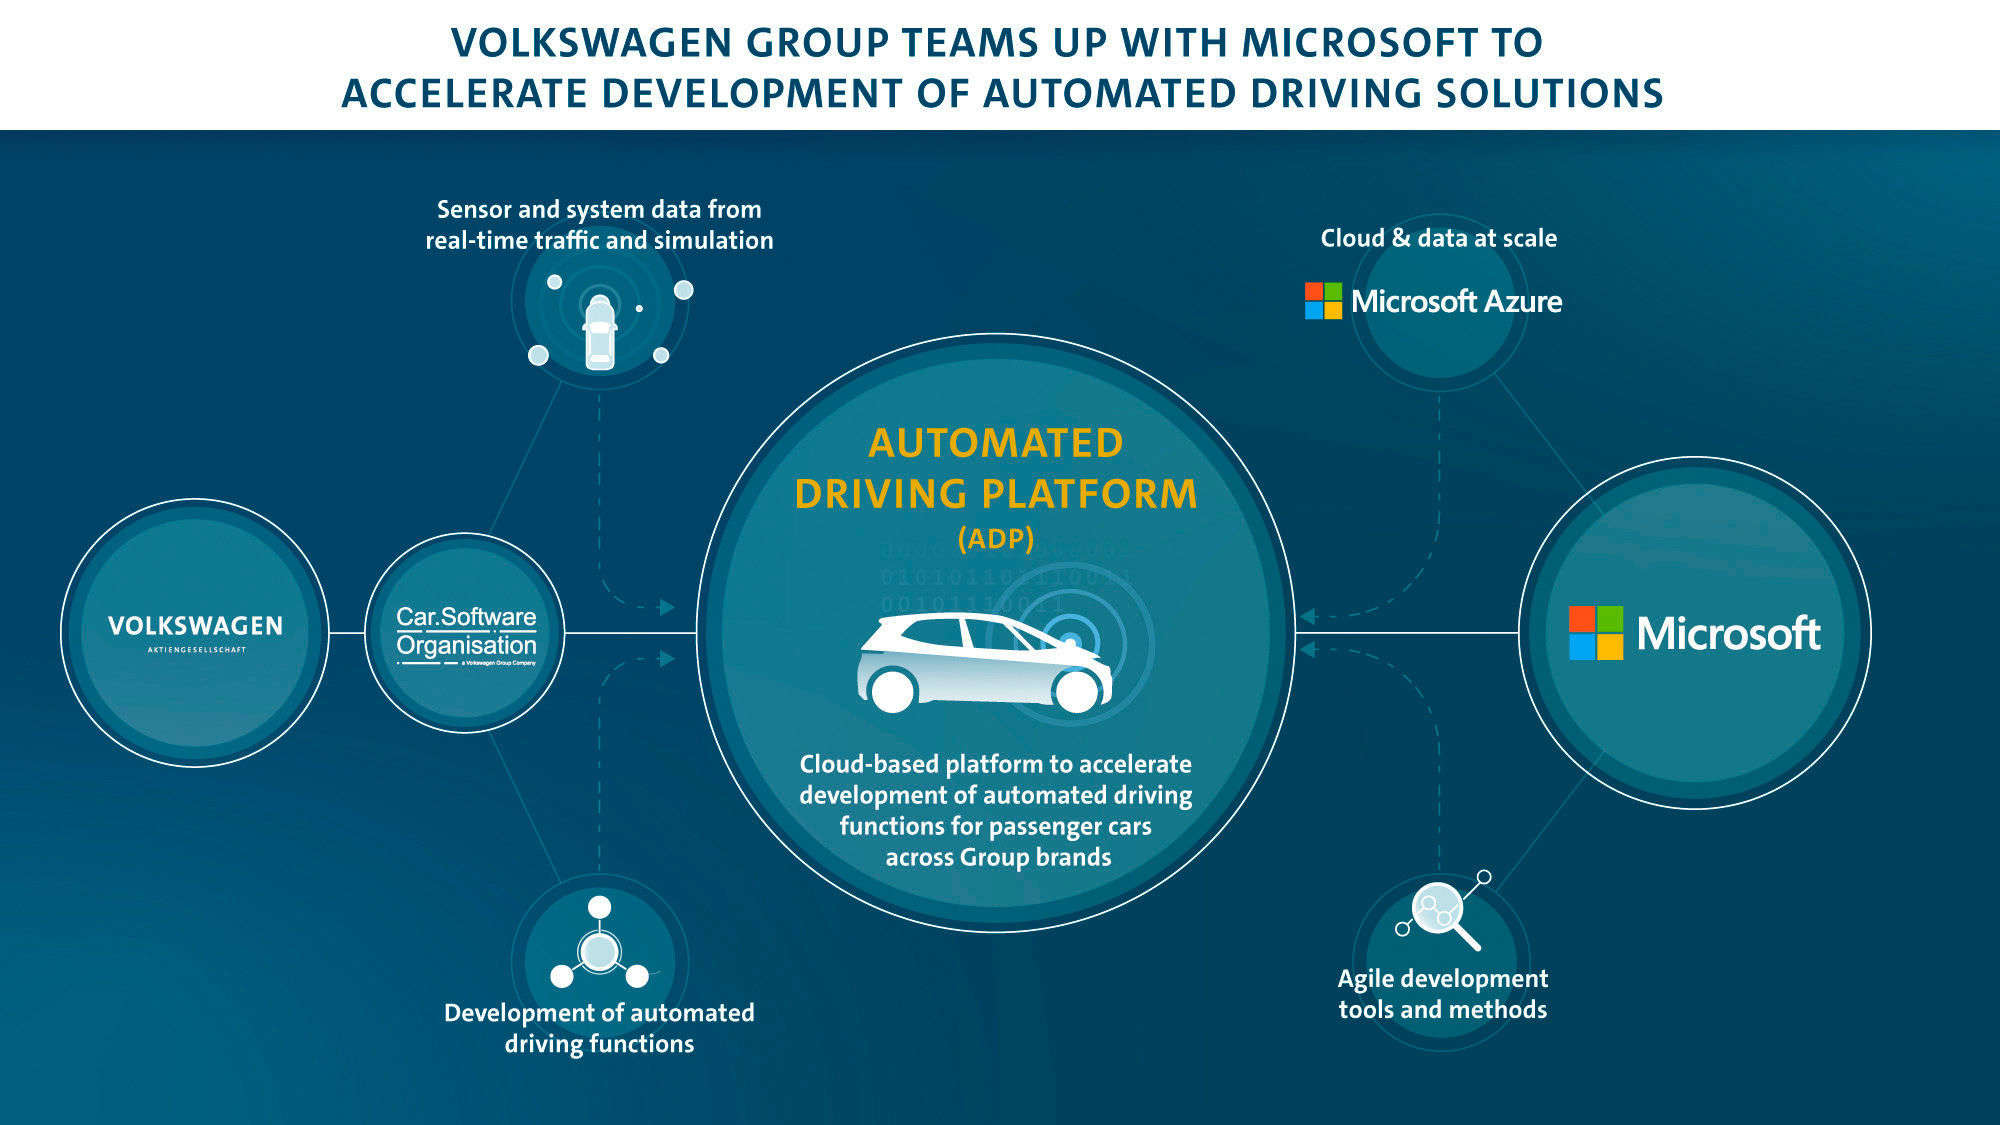 Founded last year, Car.Software Organisation plays a key role in the transformation of the Volkswagen Group towards a software-driven mobility provider.